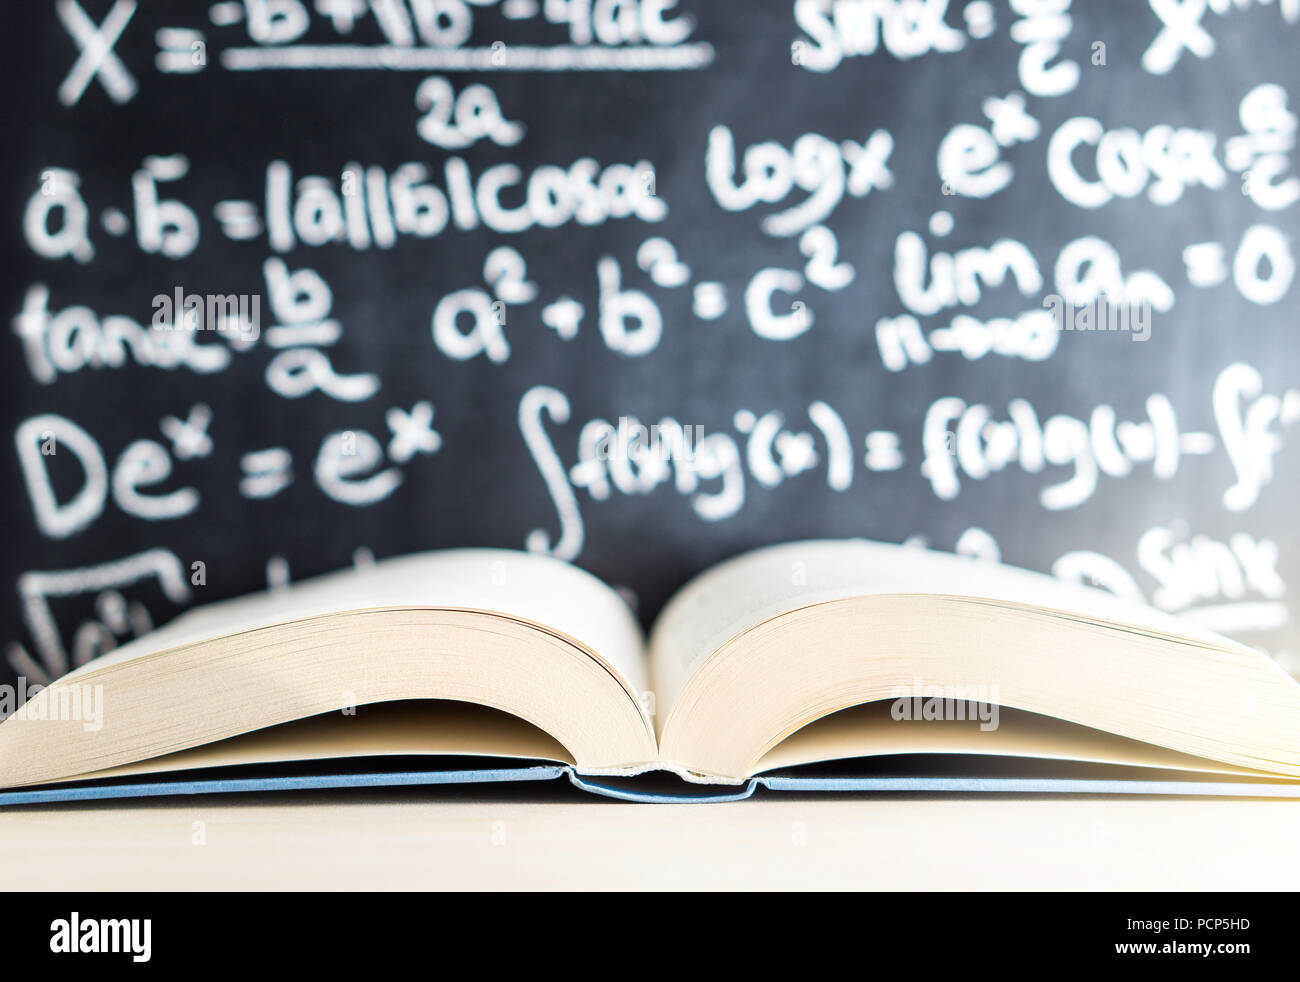 Knowledge, education, mathematics, science and wisdom concept. Open book in front of a blackboard and chalkboard full of math writing. Stock Photo